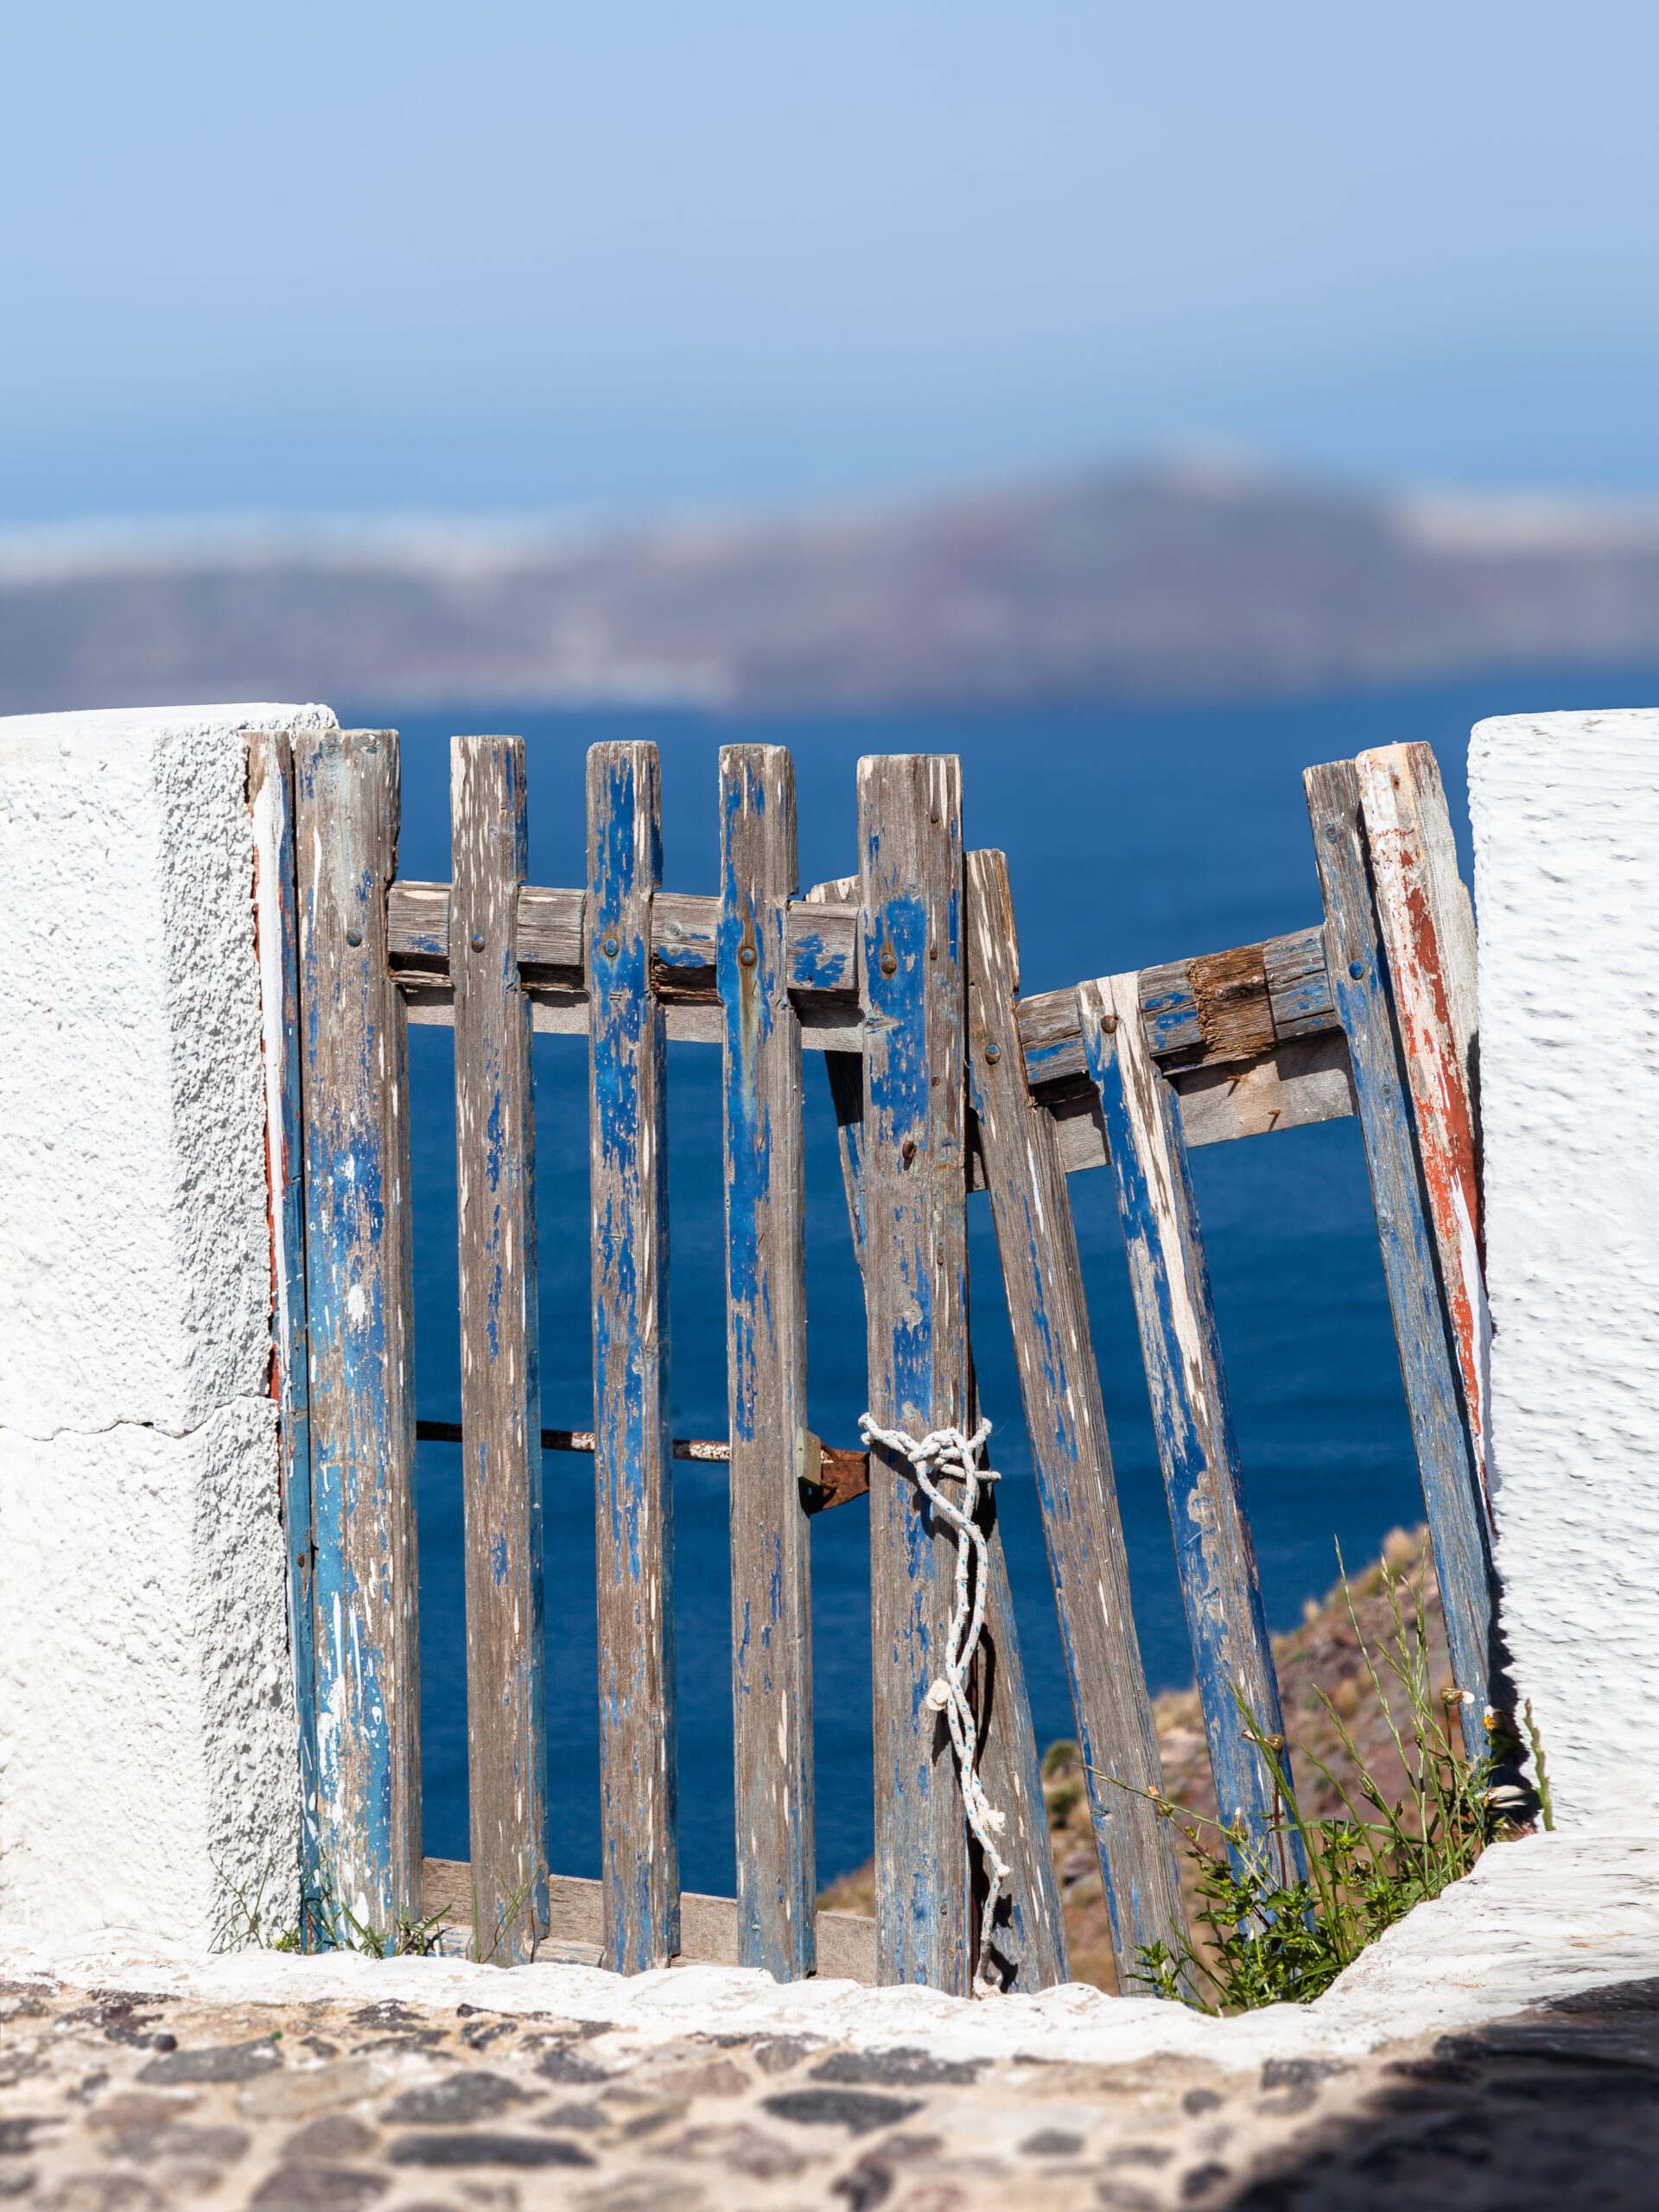 Weathered blue wooden fence with ocean view in Santorini, Greece.